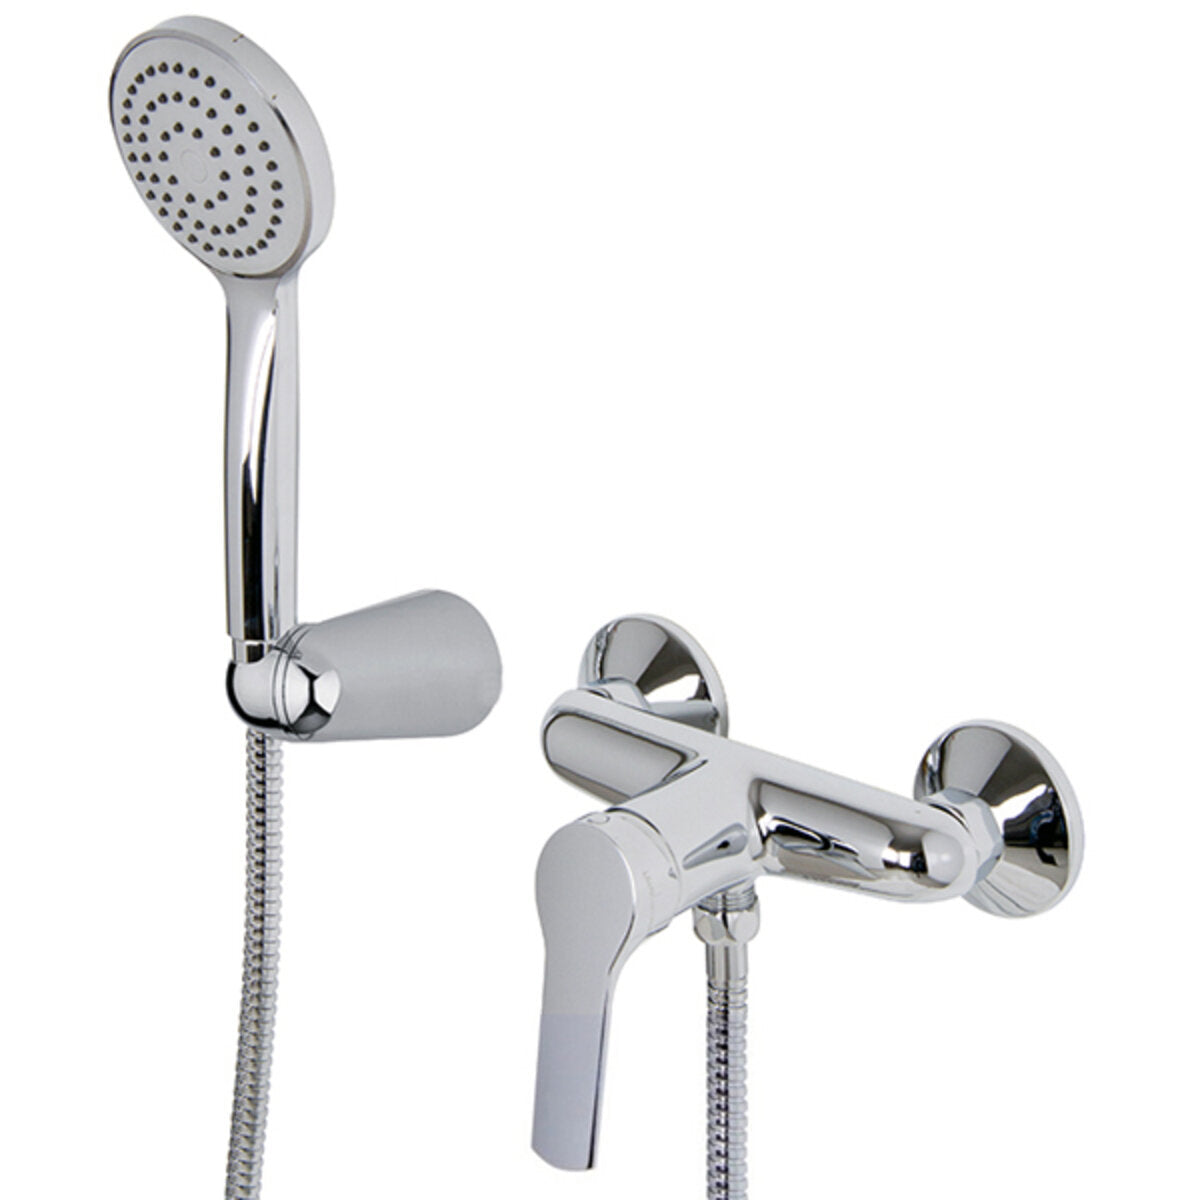 Fima Carlo Frattini series 4 external shower mixer without diverter with shower set